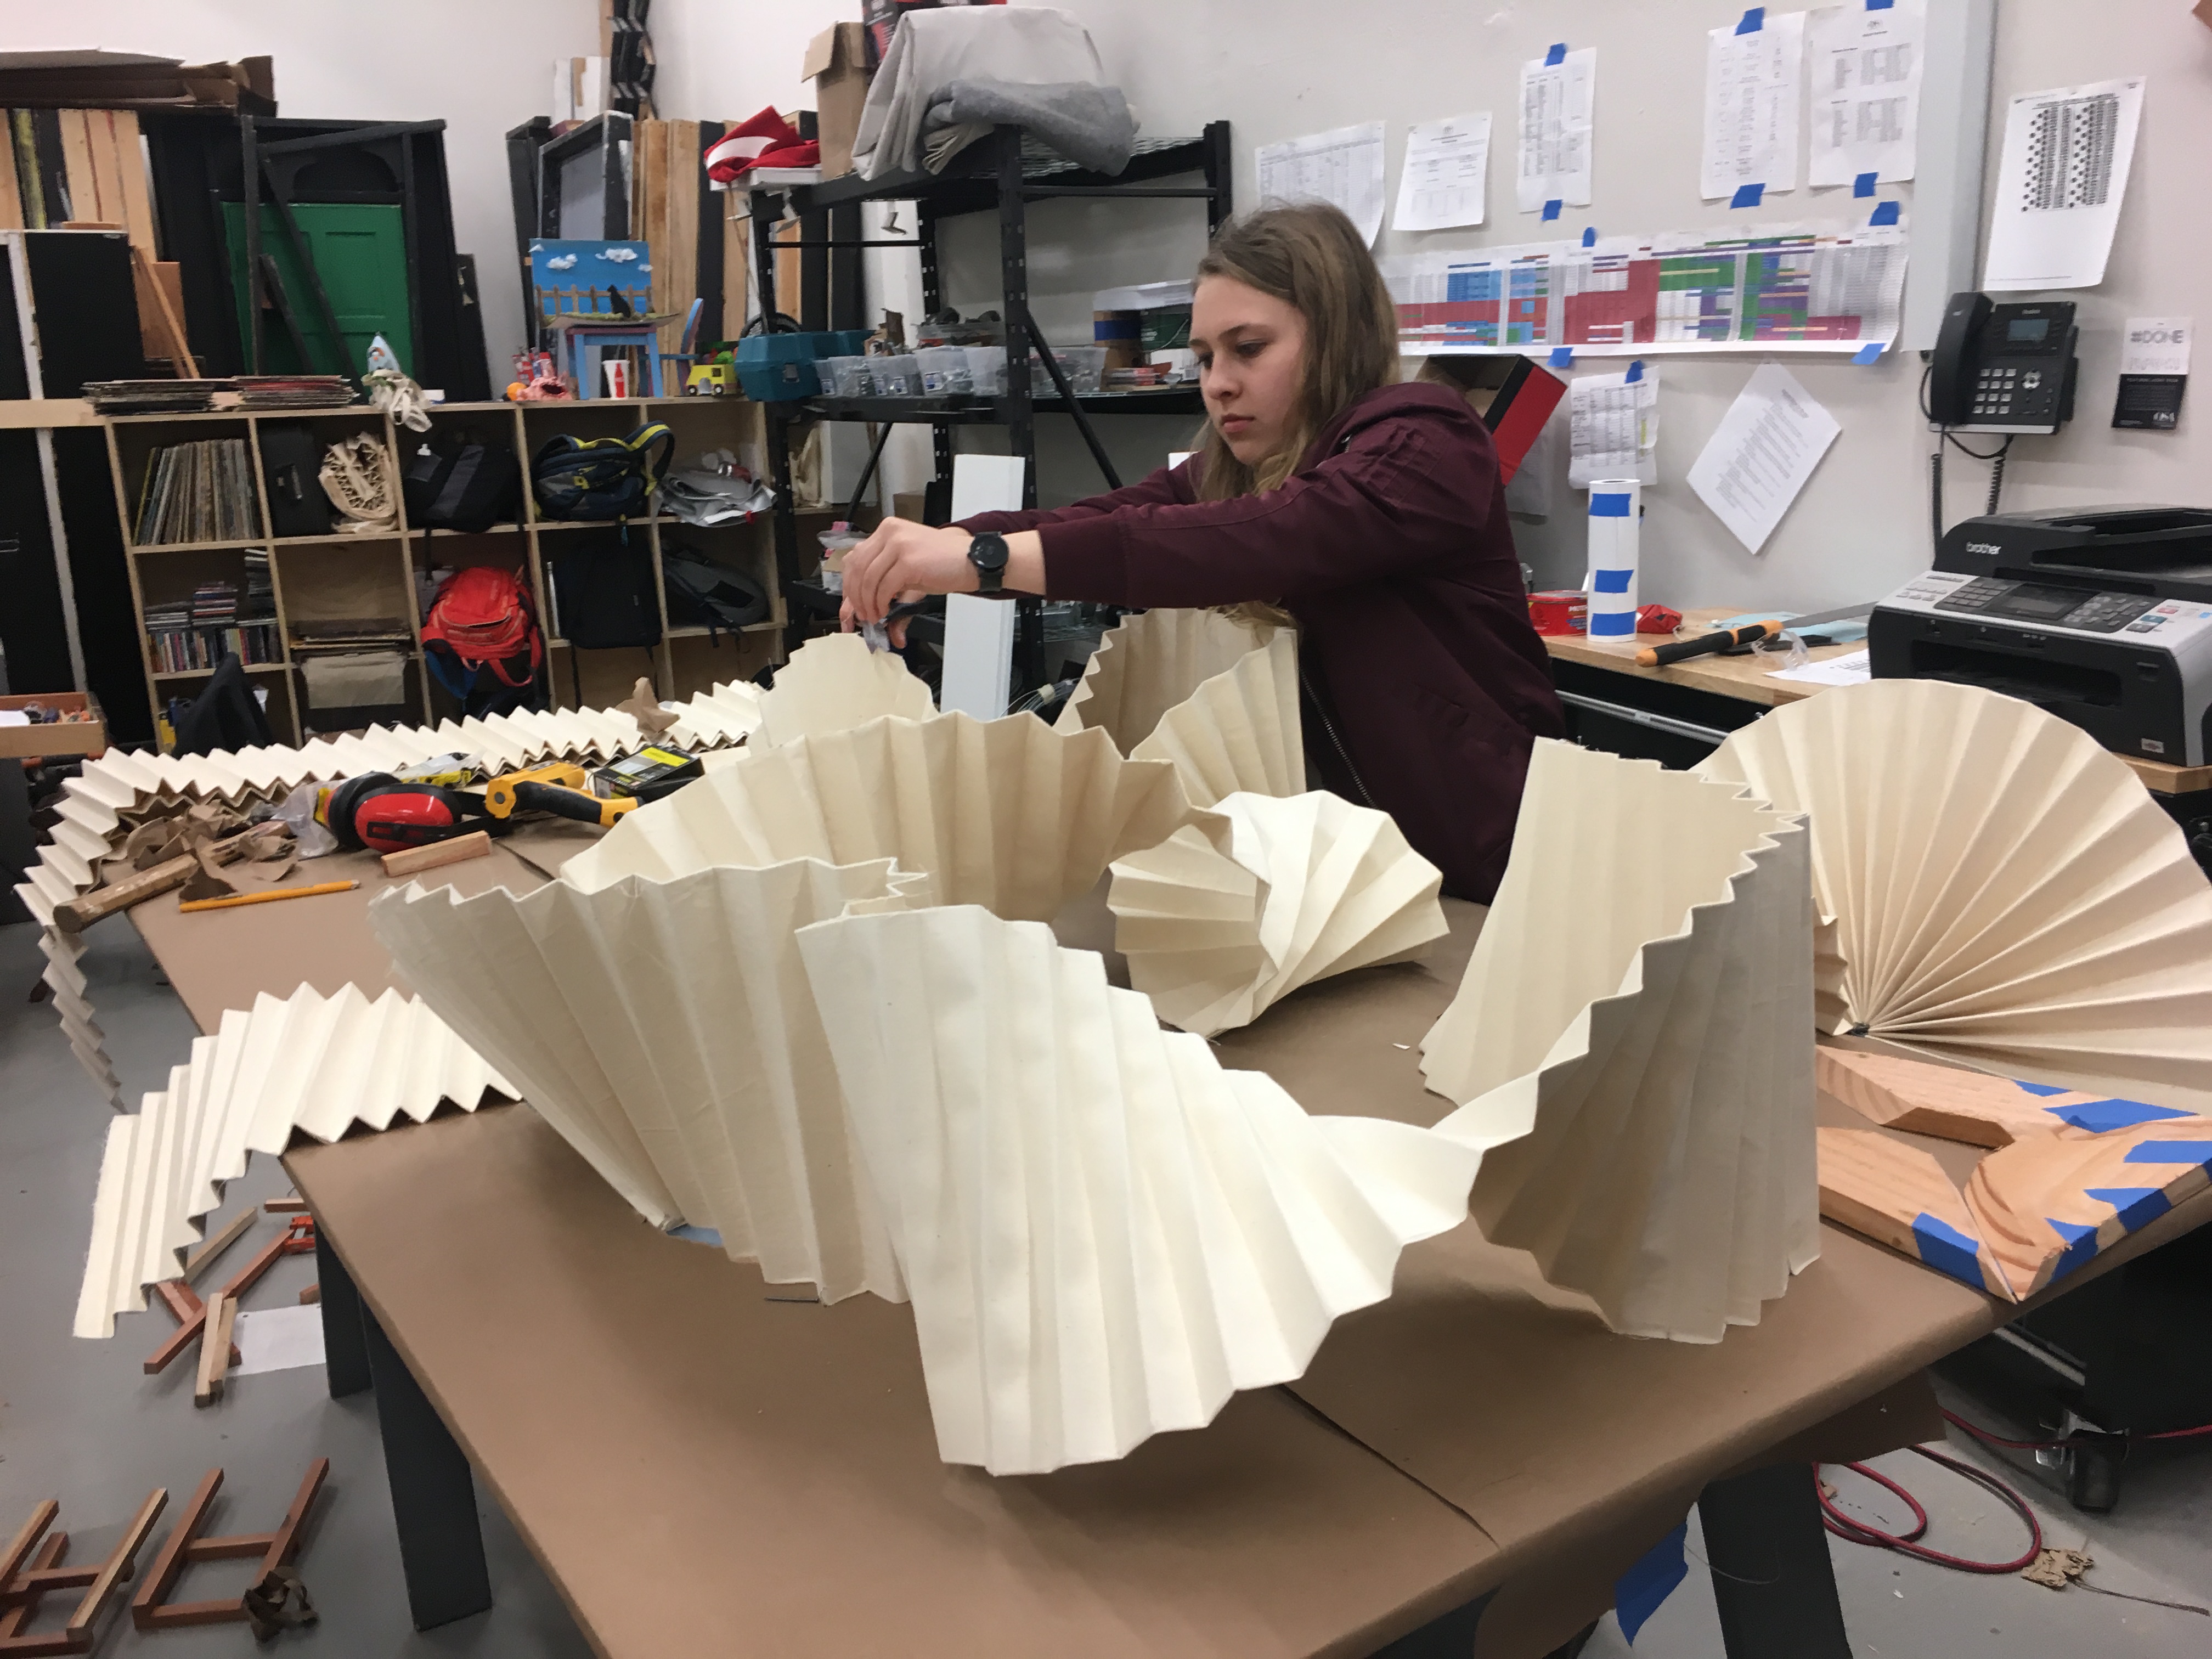 A female student working on a large art project